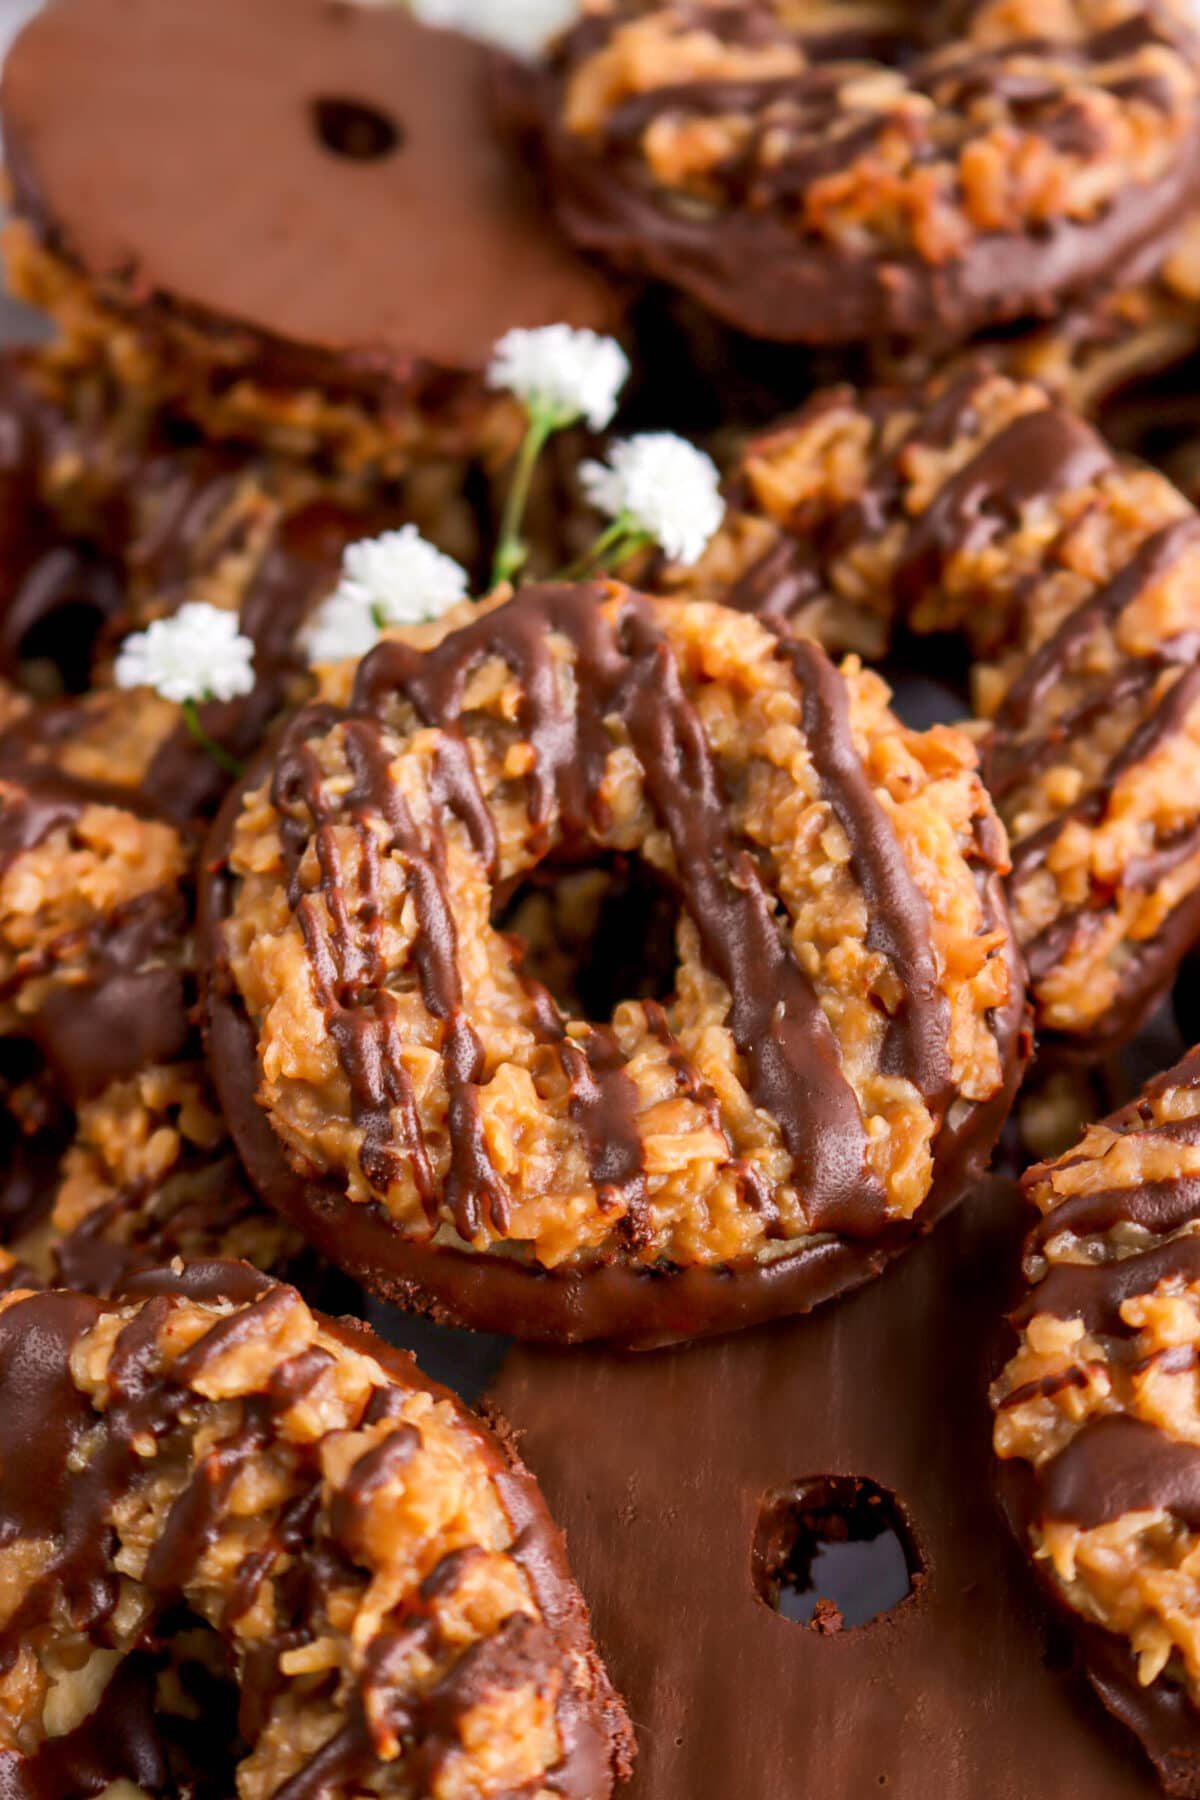 angled close up of samoas cookie with more cookies underneath and white flowers behind.